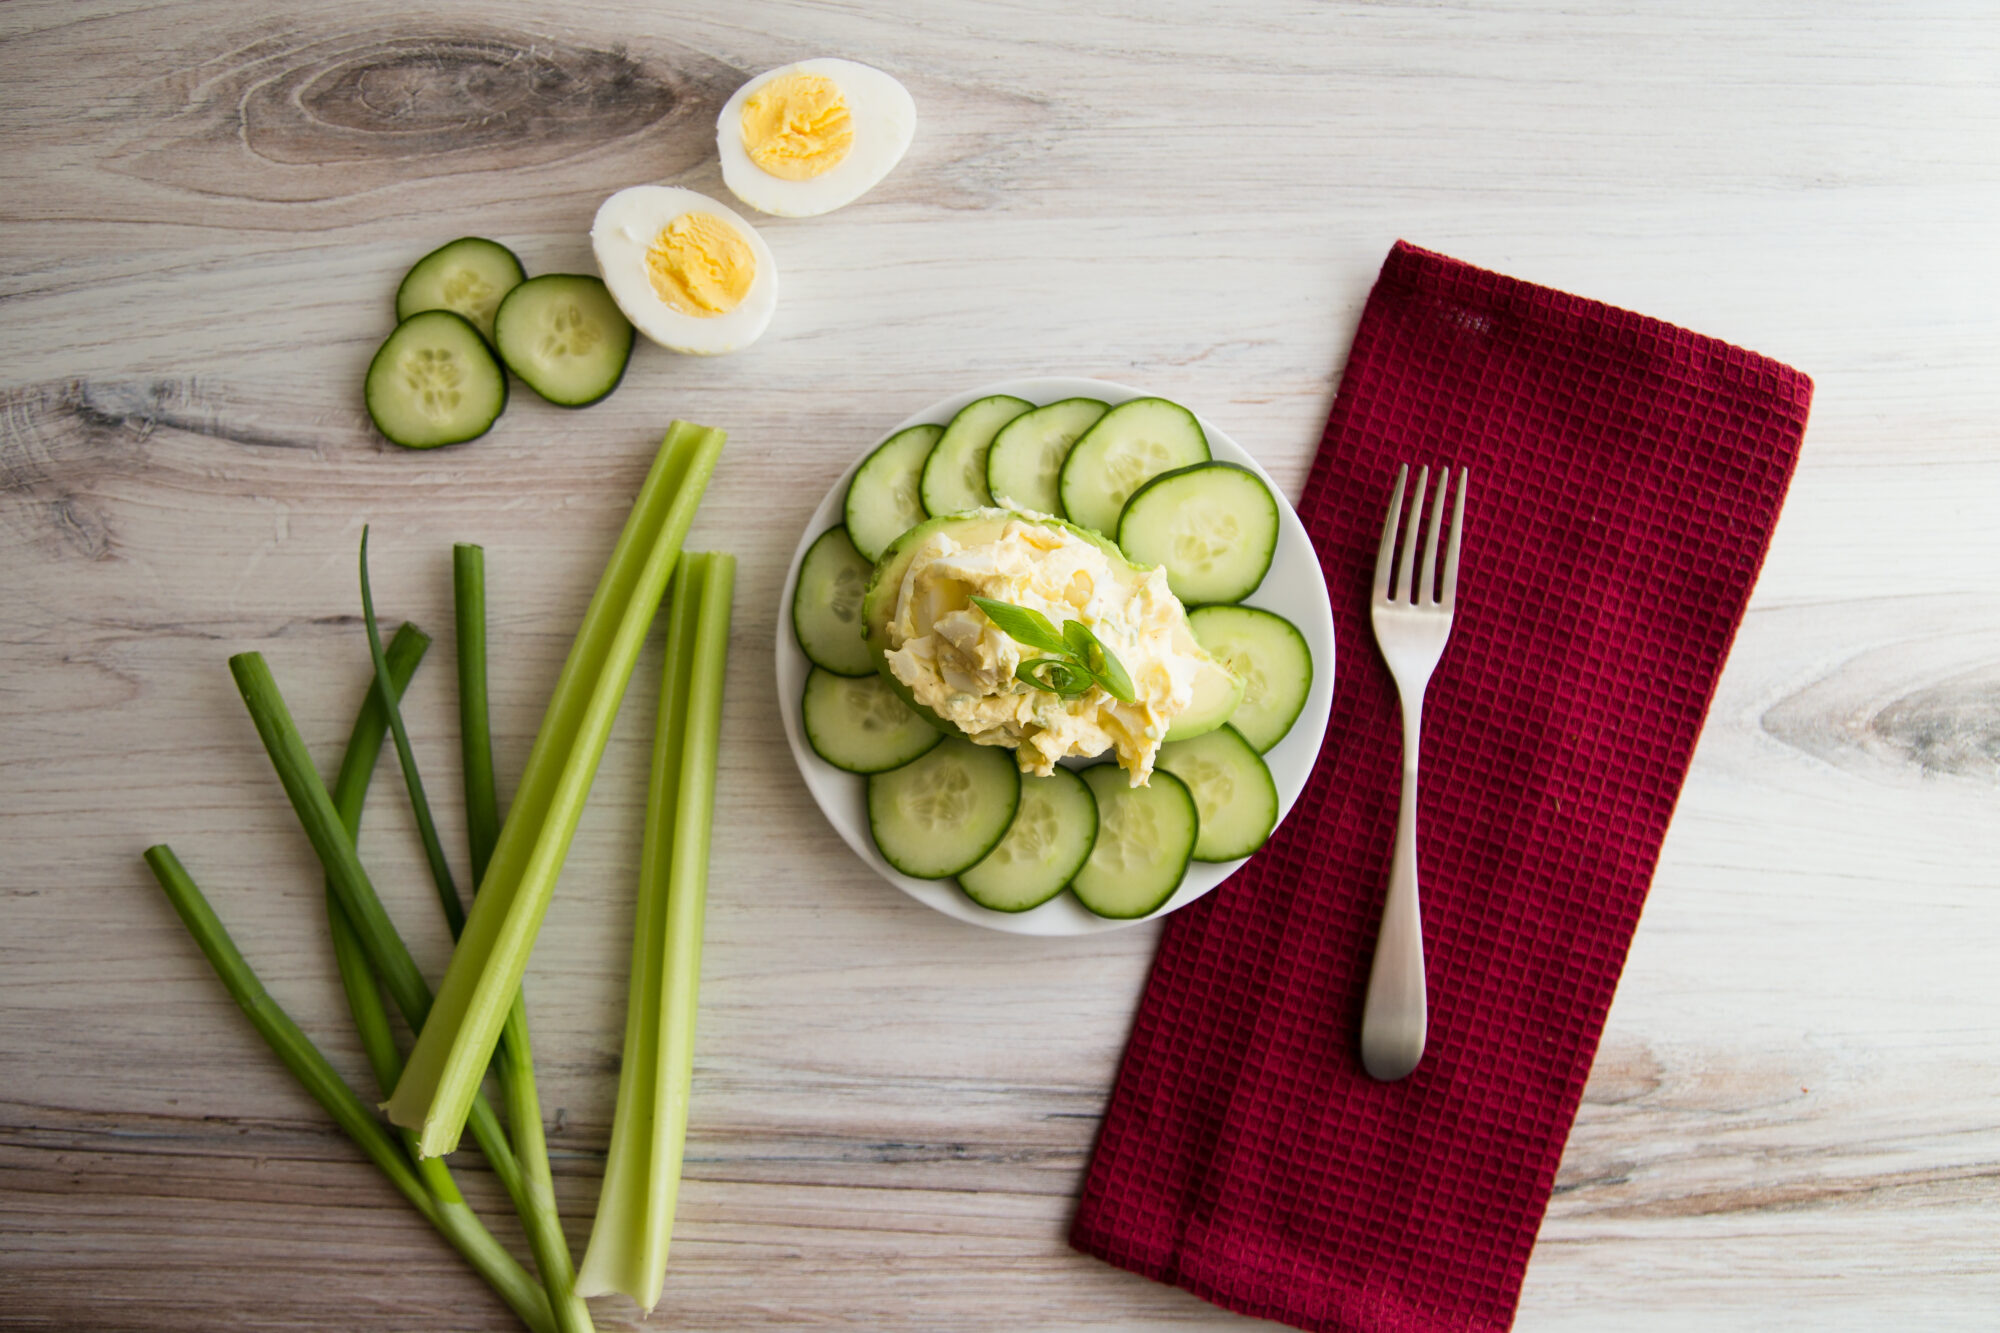 Top view-White plate, Egg salad on a half an avocado, surrounded by sliced cucumber. On the table is a red napkin, fork, celery, cucumber and a hard boiled egg, sliced in half